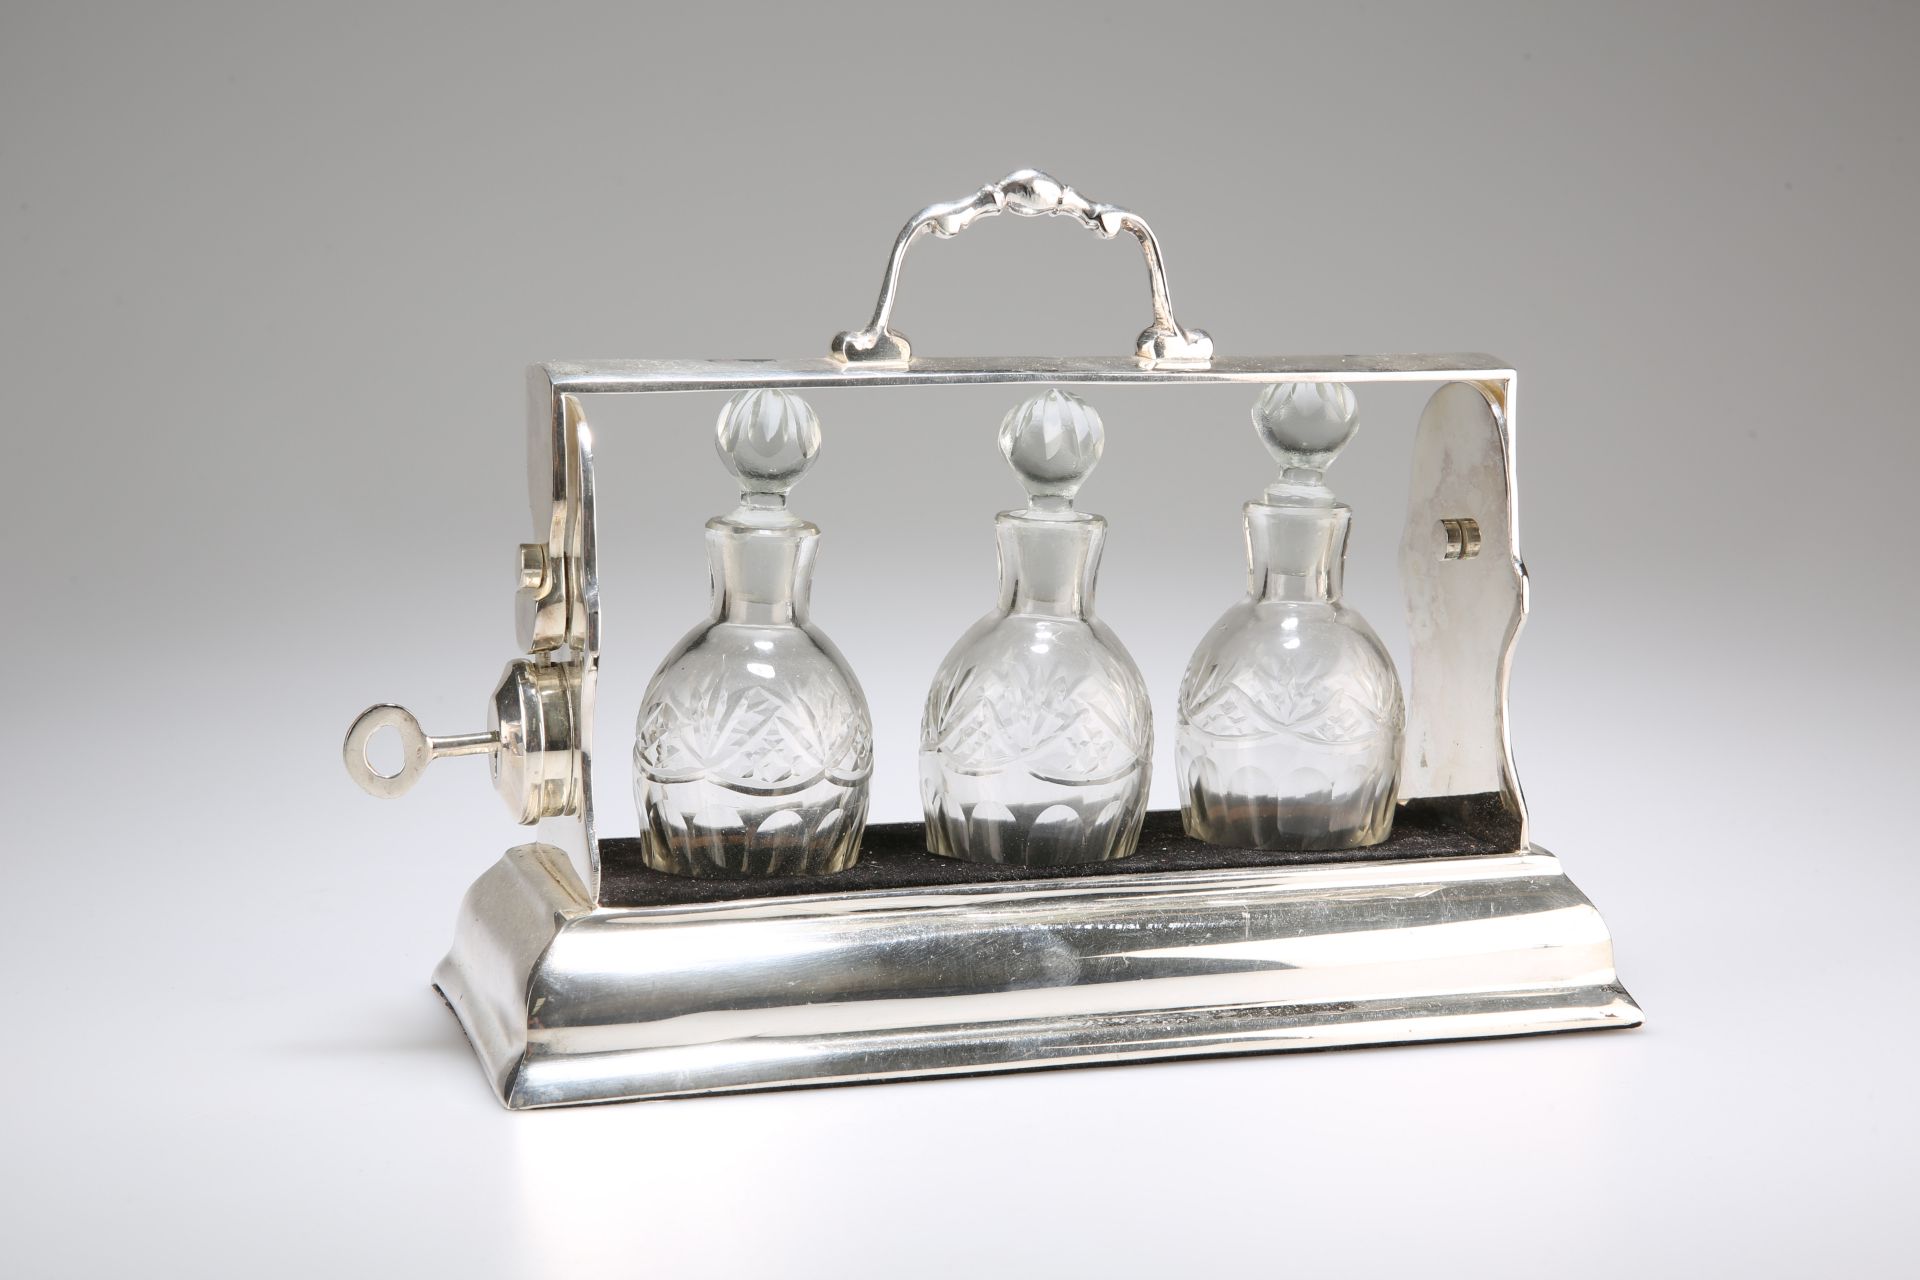 AN EDWARDIAN SILVER-PLATED THREE-BOTTLE TANTALUS